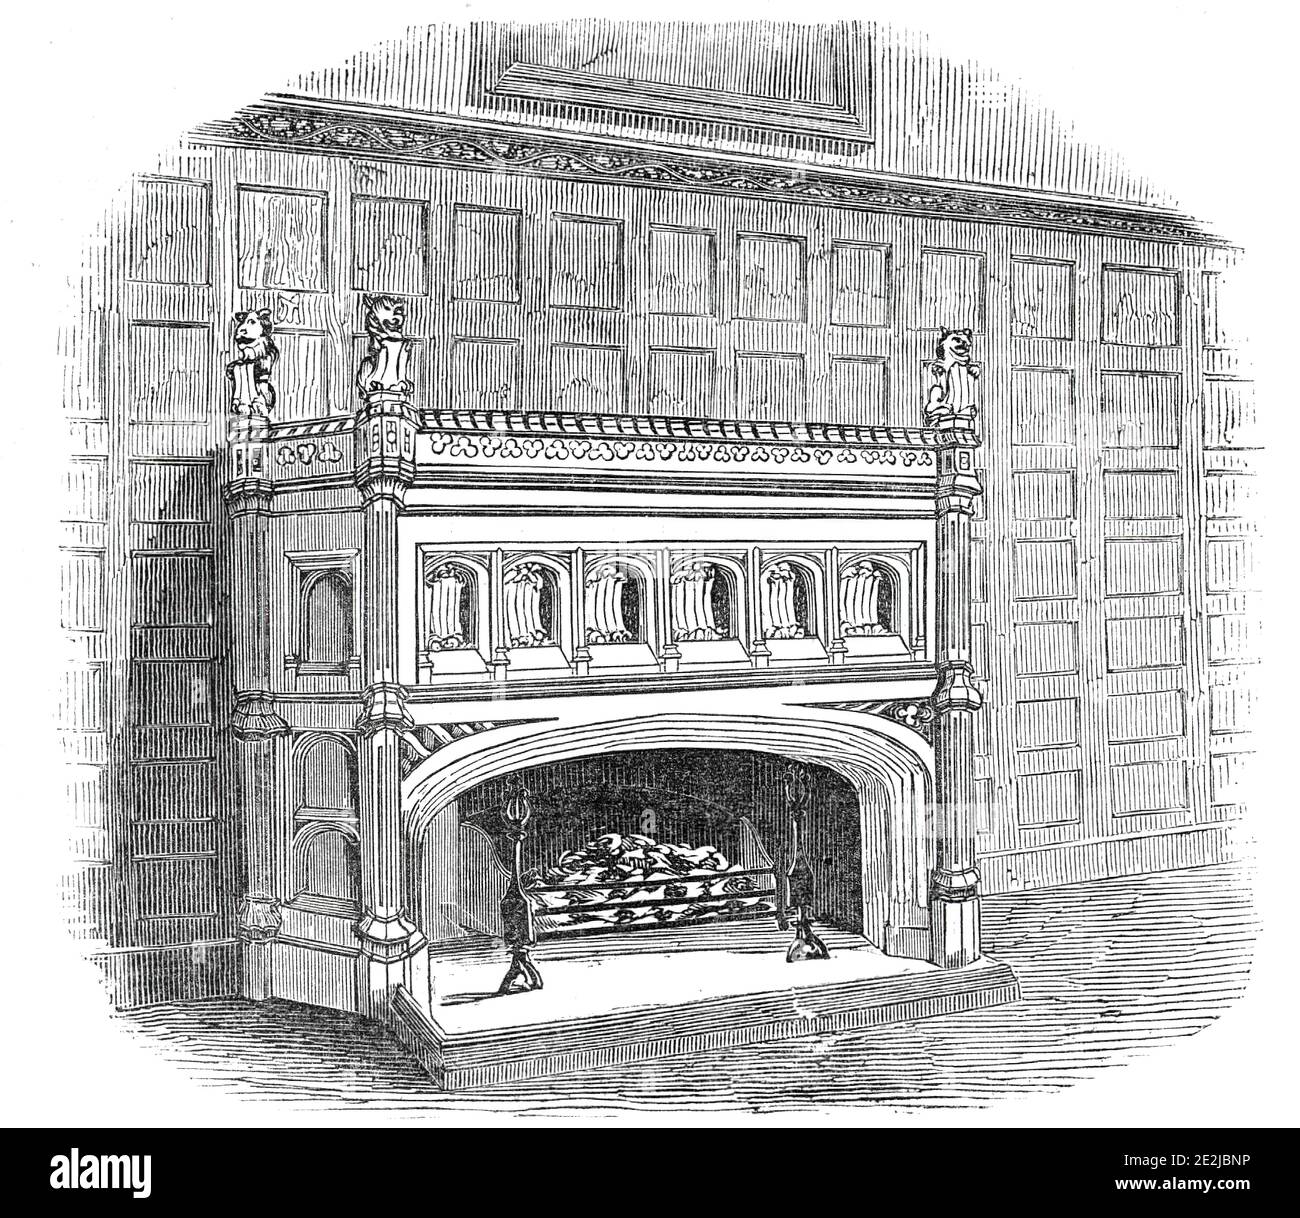 Drawing-room chimney piece, Lincoln's Inn New Buildings, 1845. Mantelpiece and open fire at Lincoln's Inn, one of the Inns of Court at Holborn in London. The new complex was designed by Philip Hardwick. From &quot;Illustrated London News&quot;, 1845, Vol VII. Stock Photo